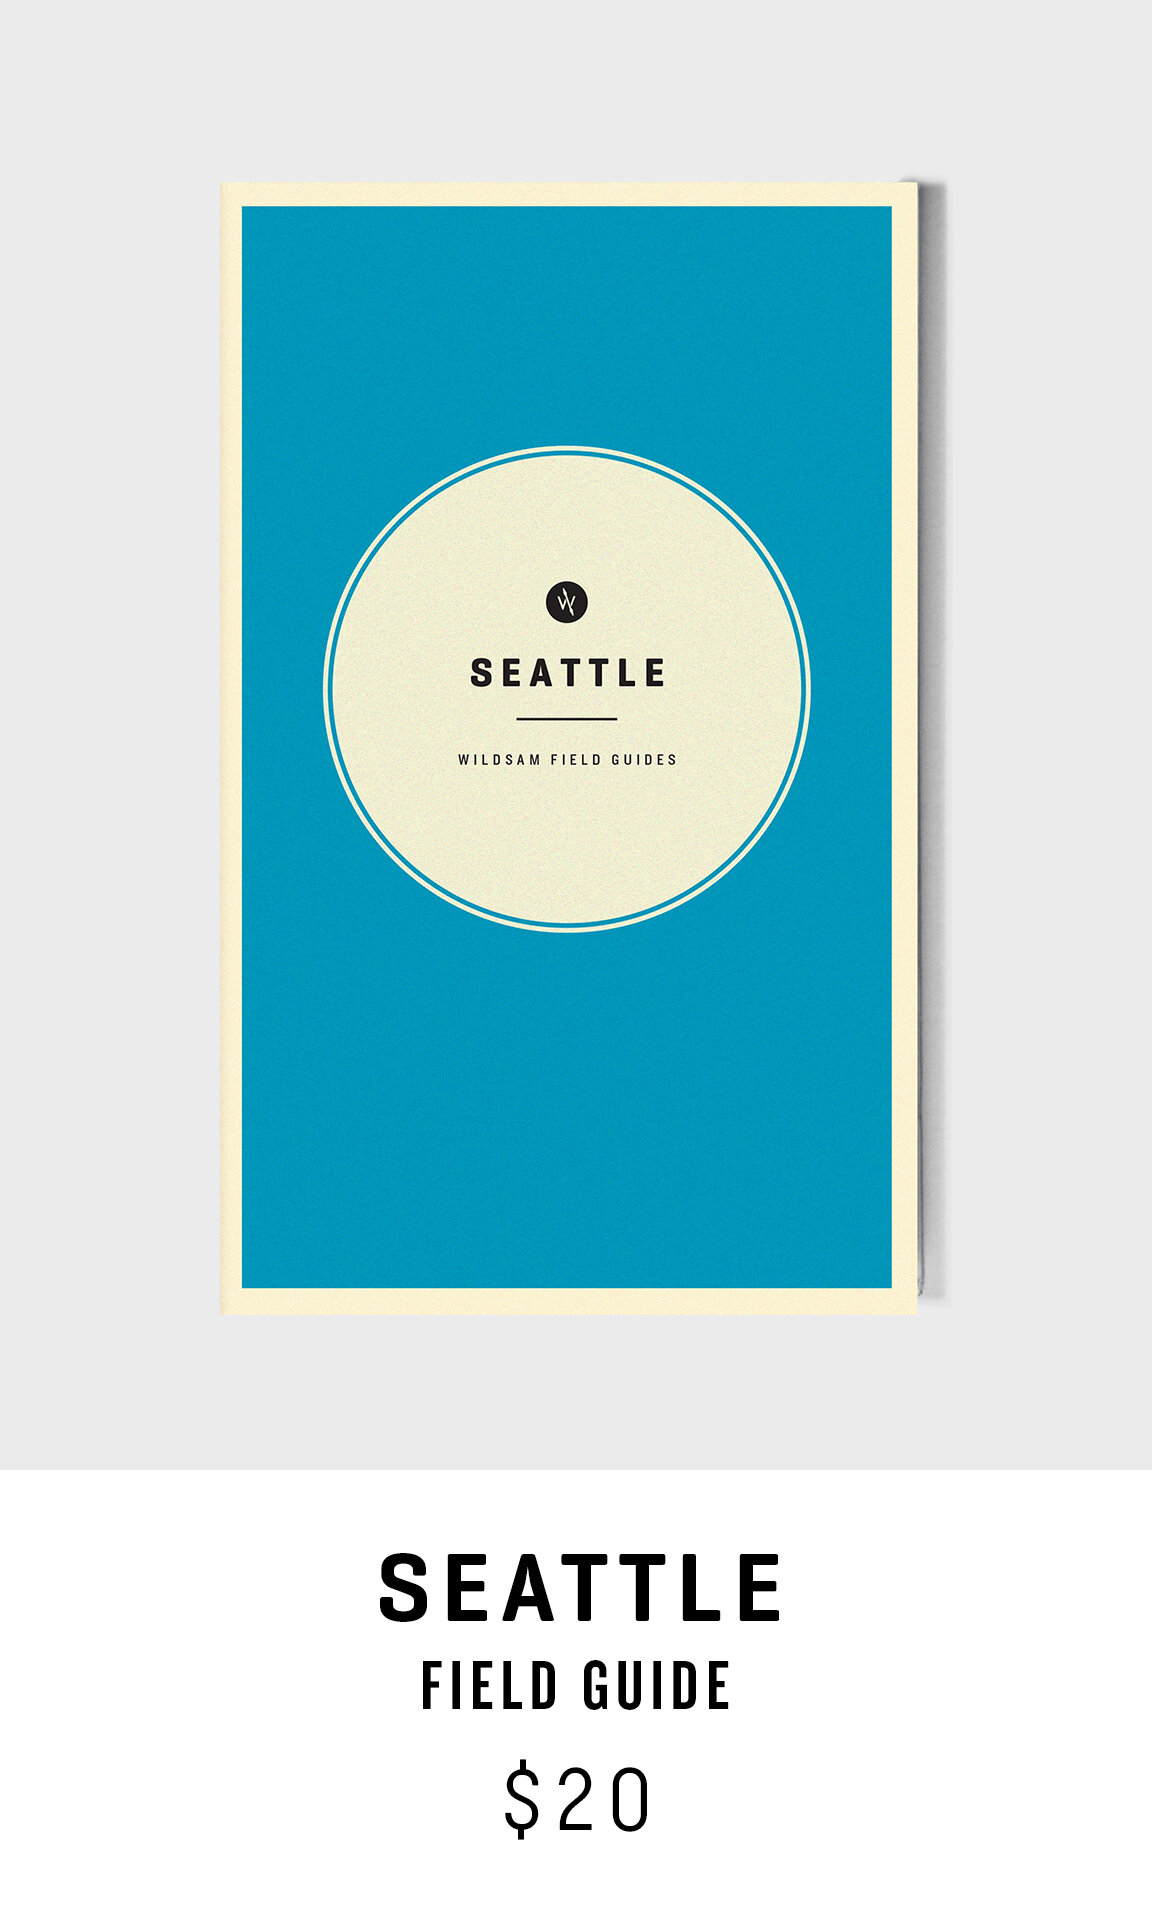 Seattle-Product-CARD.jpg